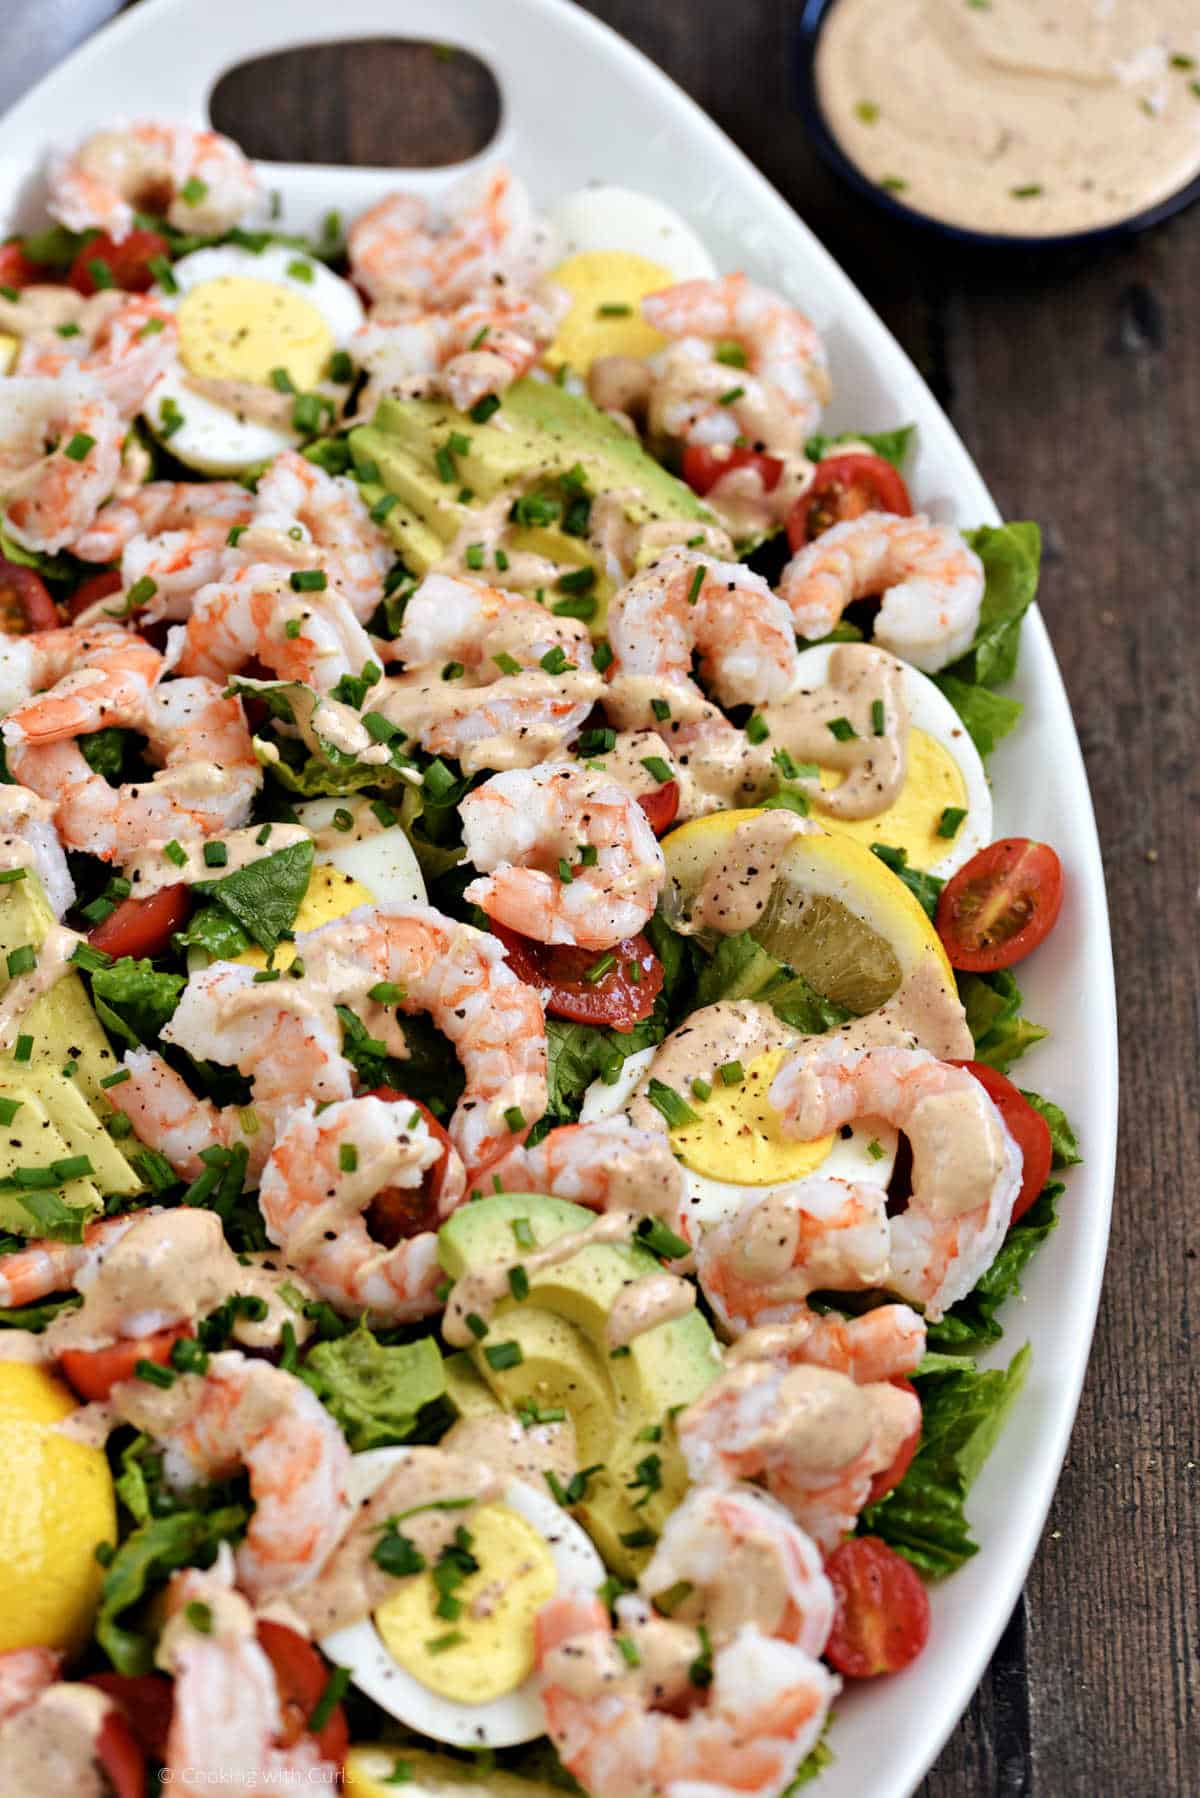 An oval platter with lettuce, shrimp, avocado, tomato, and eggs.